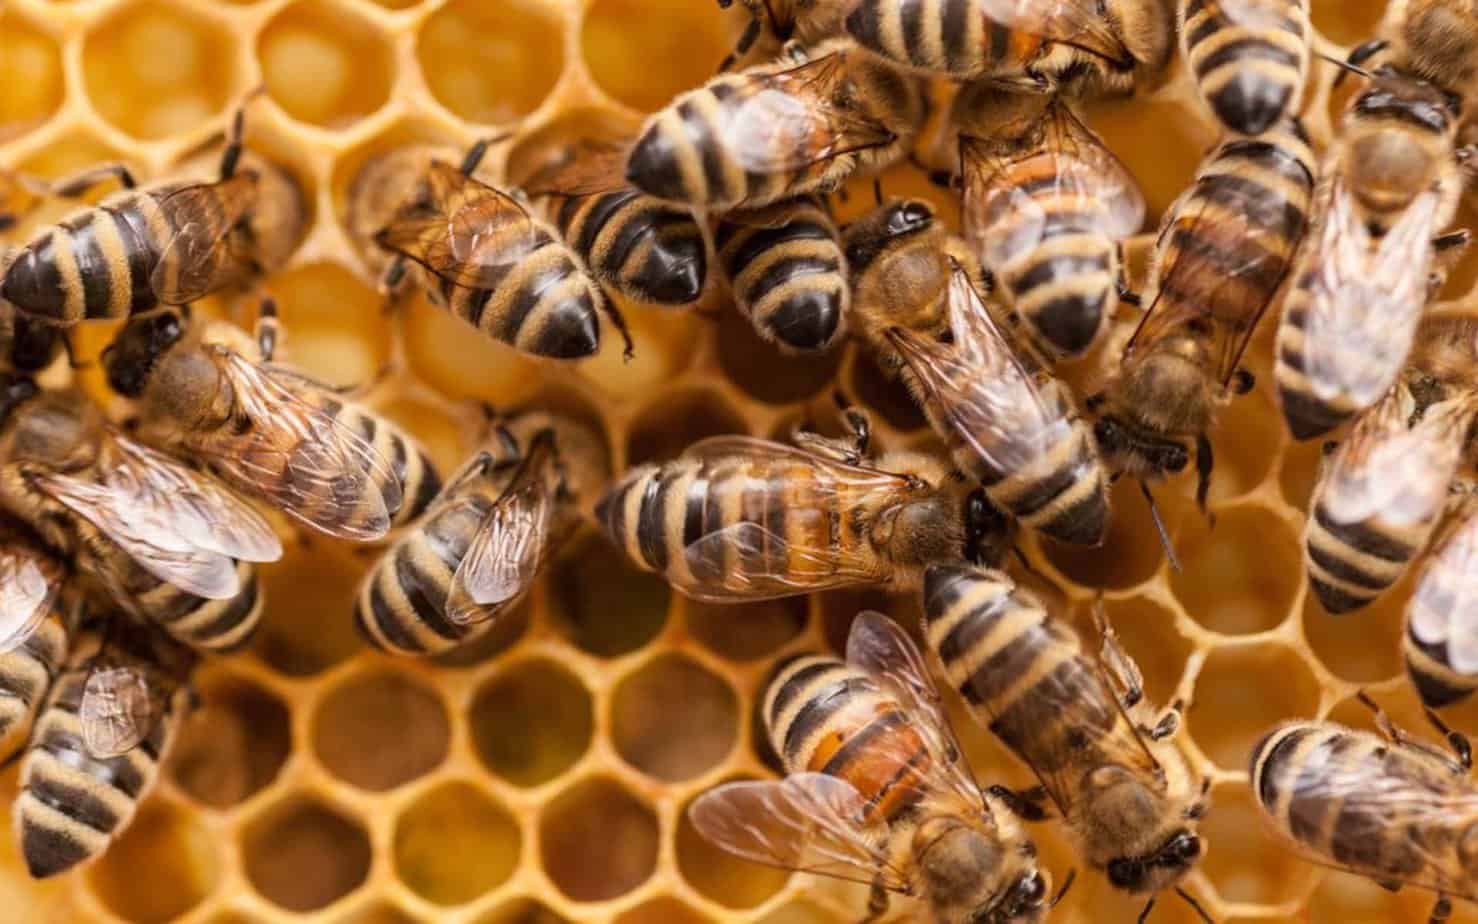 Finally, Some Good News for Bees